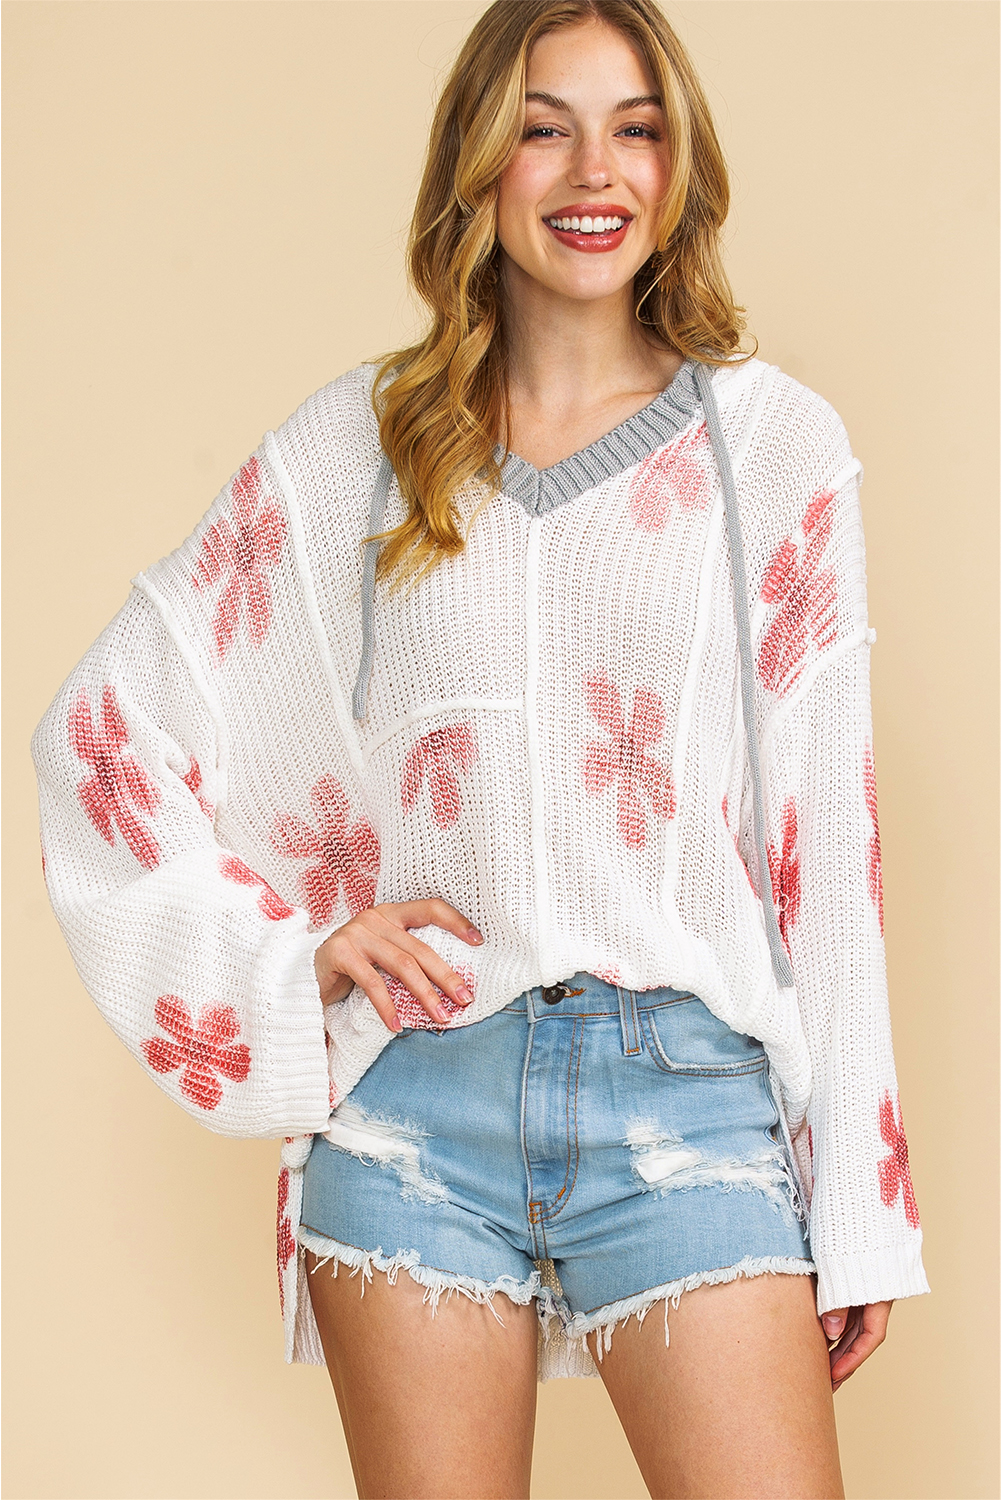 Wholesale White 60s Floral Print Oversized Knit Hooded SWEATER